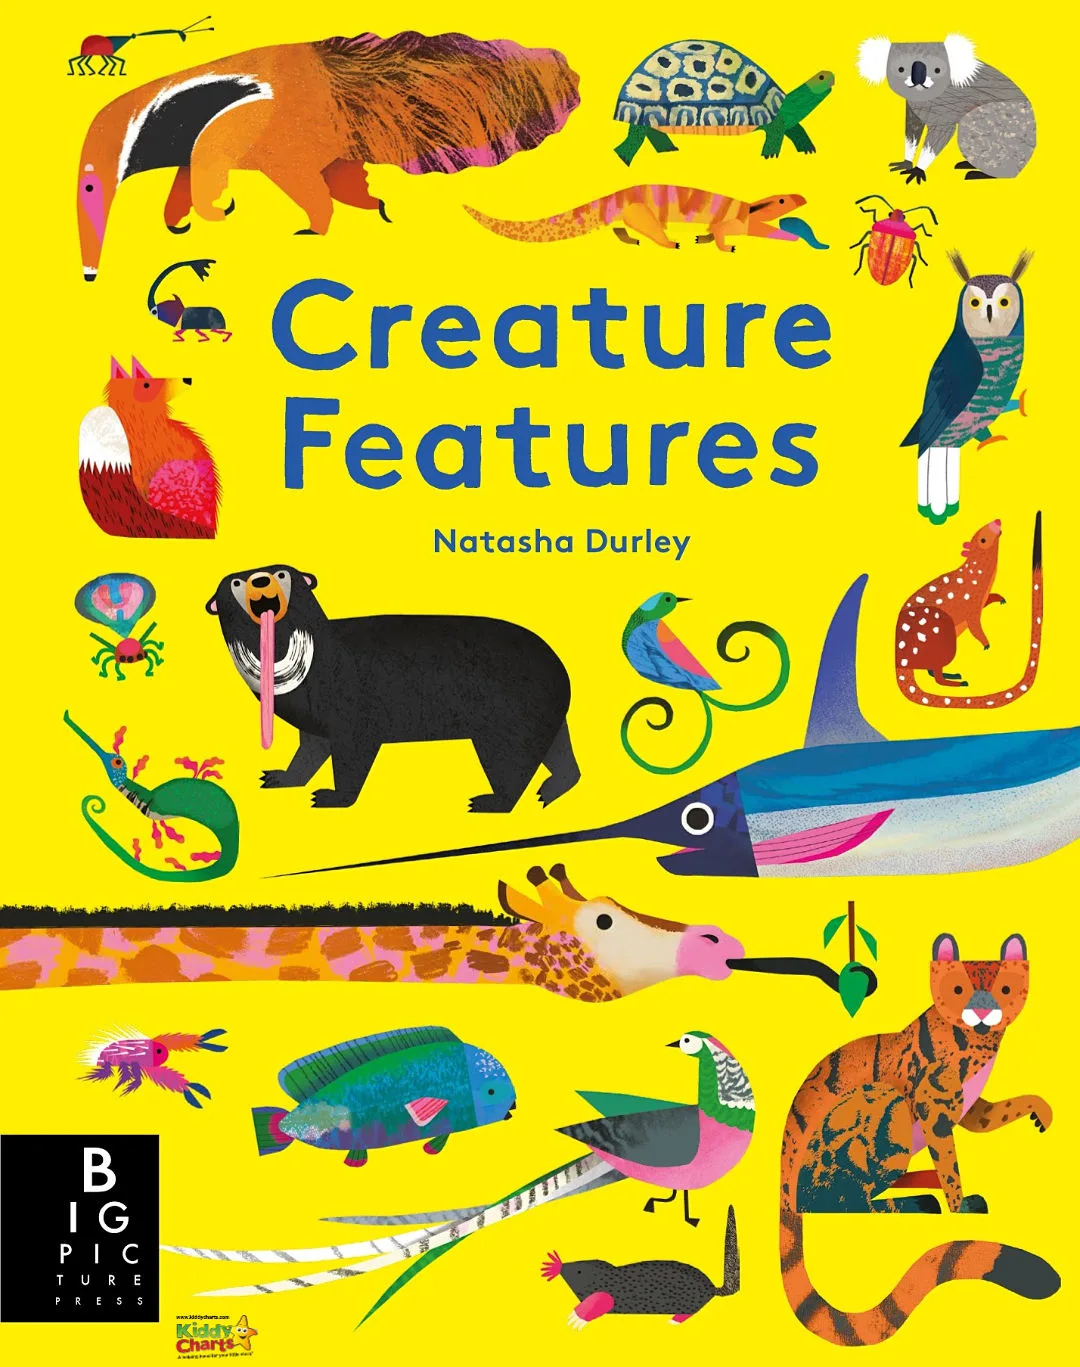 We'e got 12 of the best non fiction books for kids on the site - go on check them out NOW! #books #booksforkids #reading #nonfiction